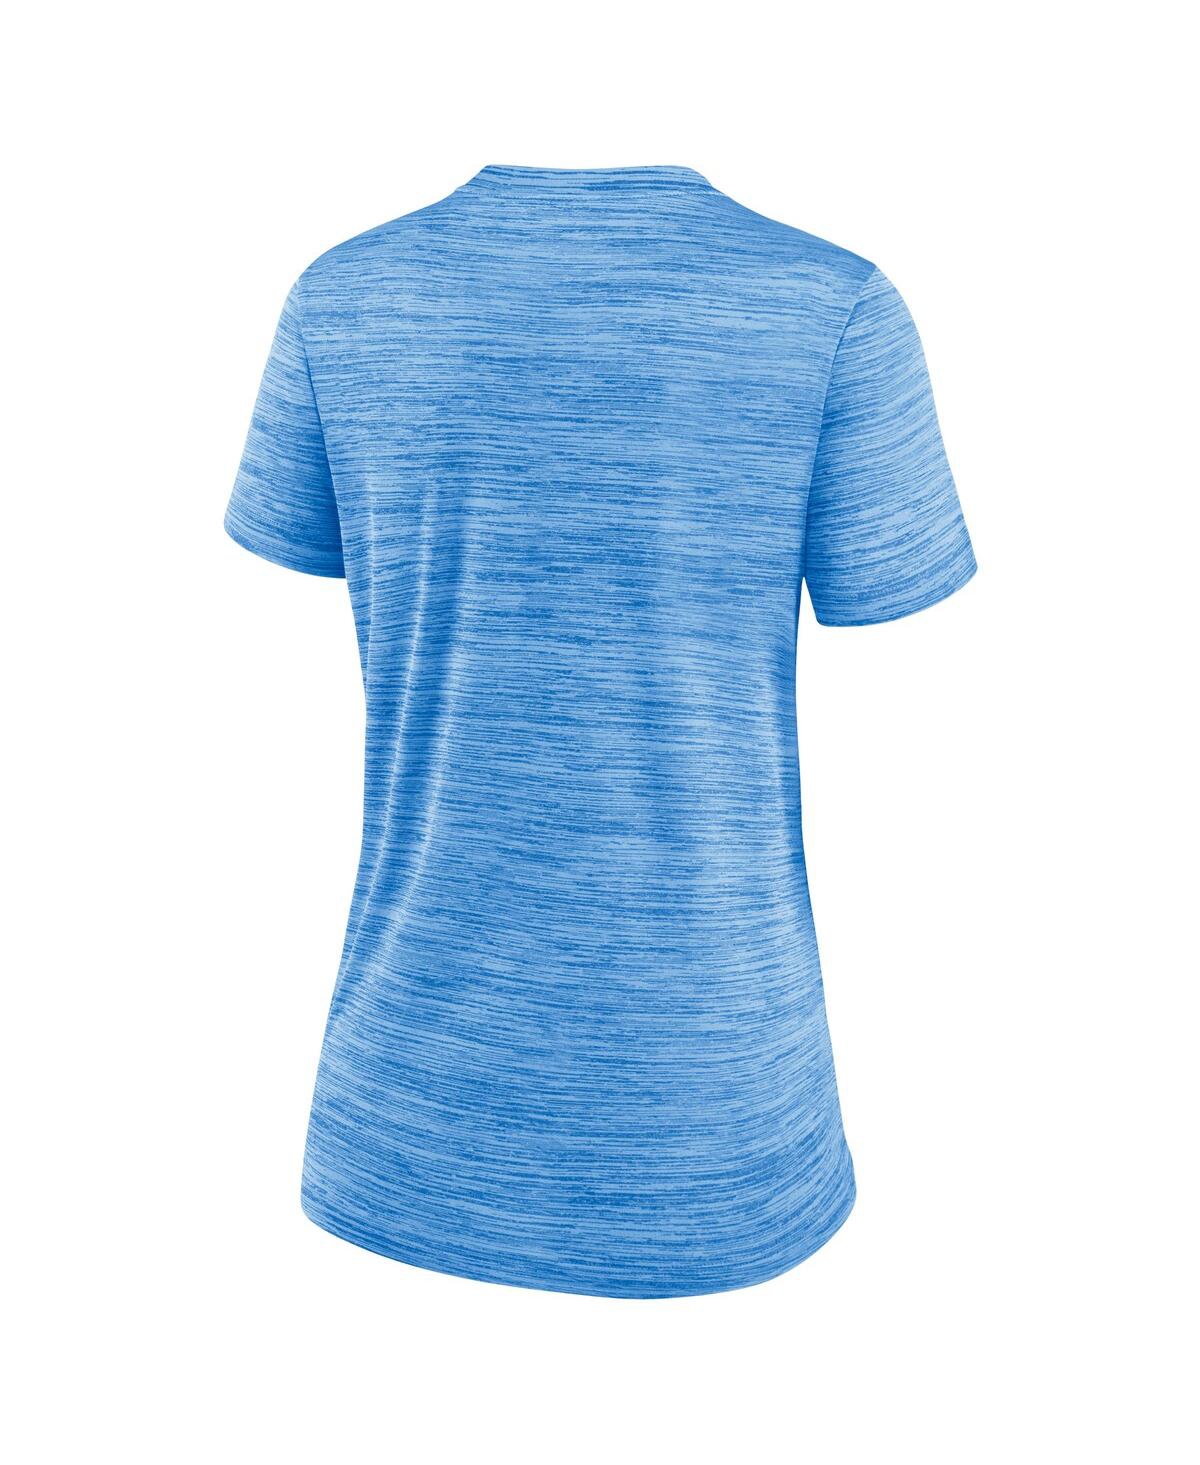 Shop Nike Women's  Powder Blue Milwaukee Brewers City Connect Velocity Practice Performance V-neck T-shirt